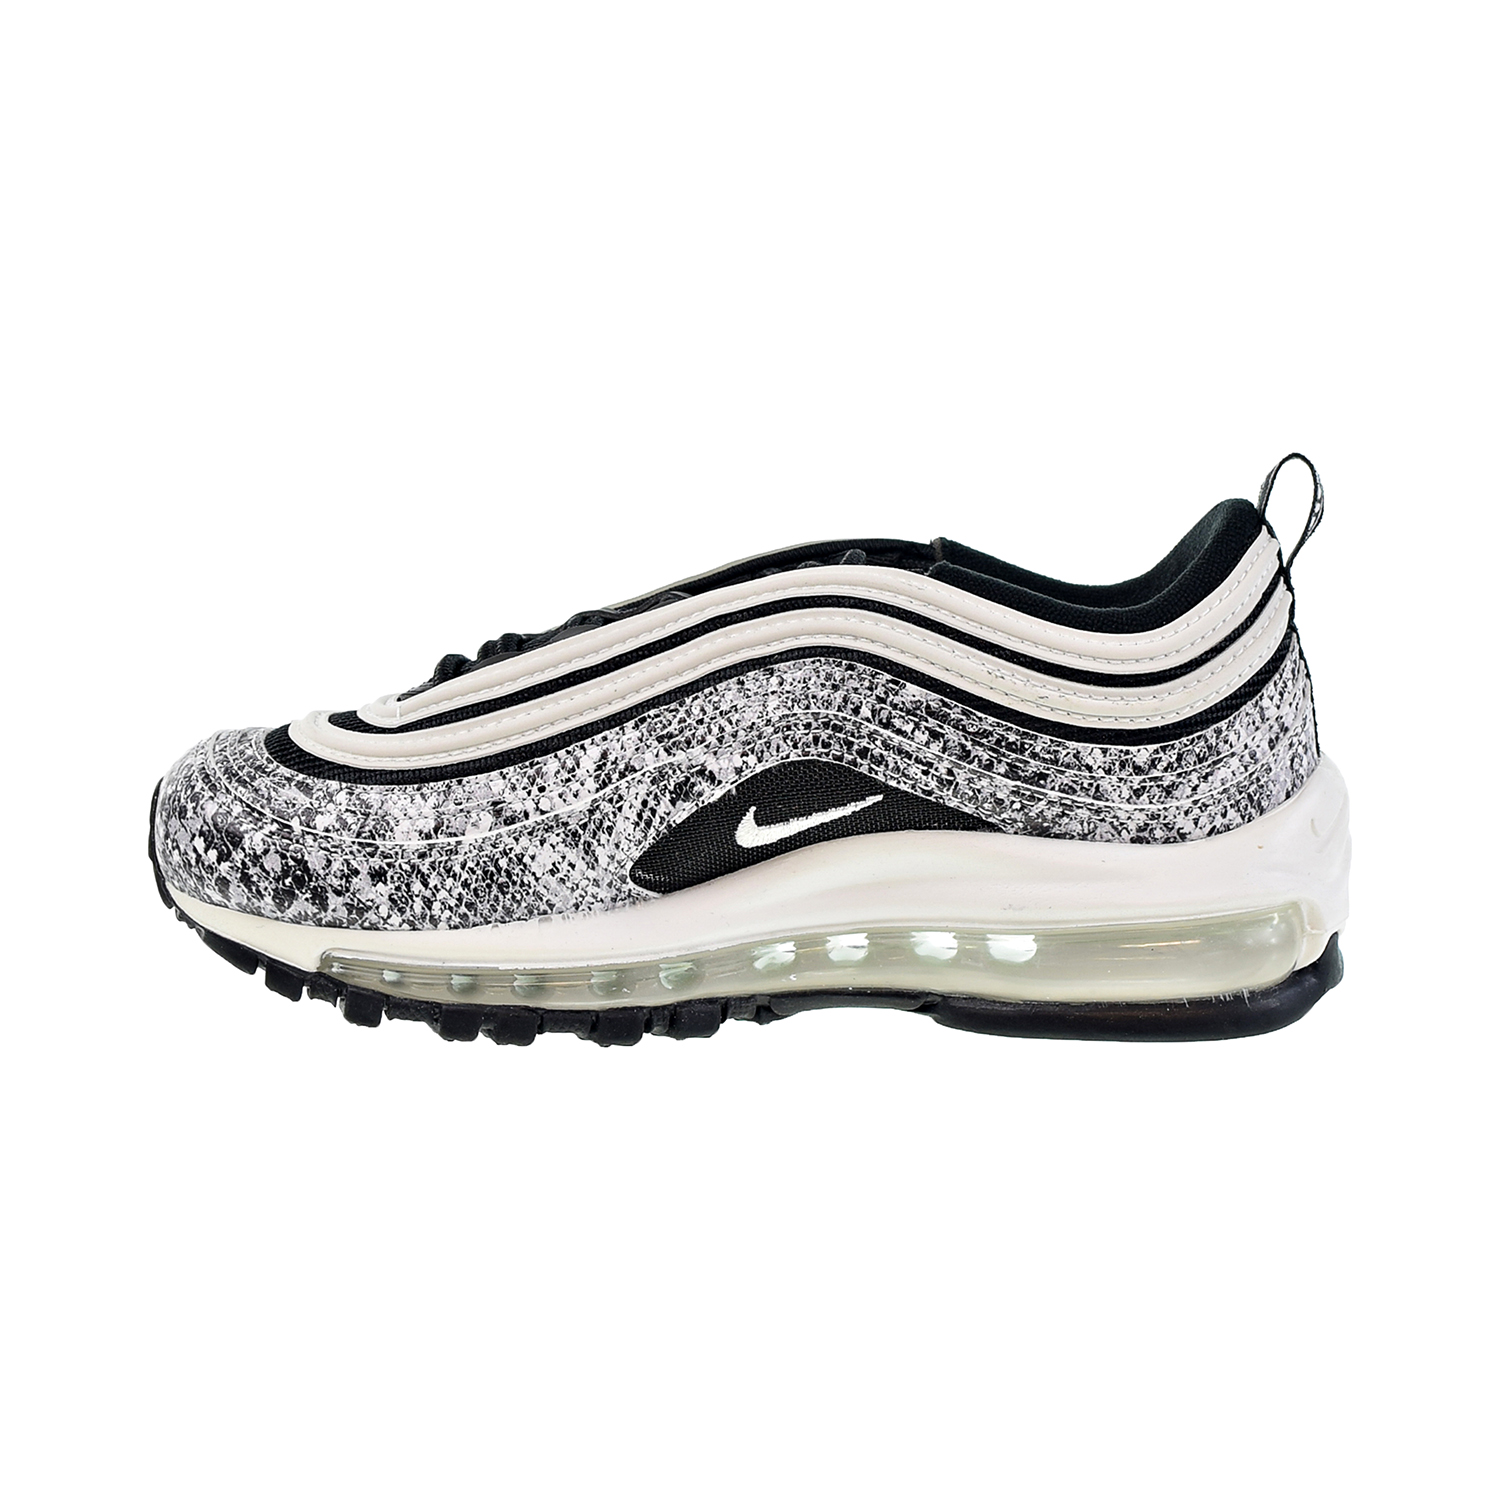 Nike Air Max 97 'Cocoa Snake' Women's Shoes Black-White ct1549-001